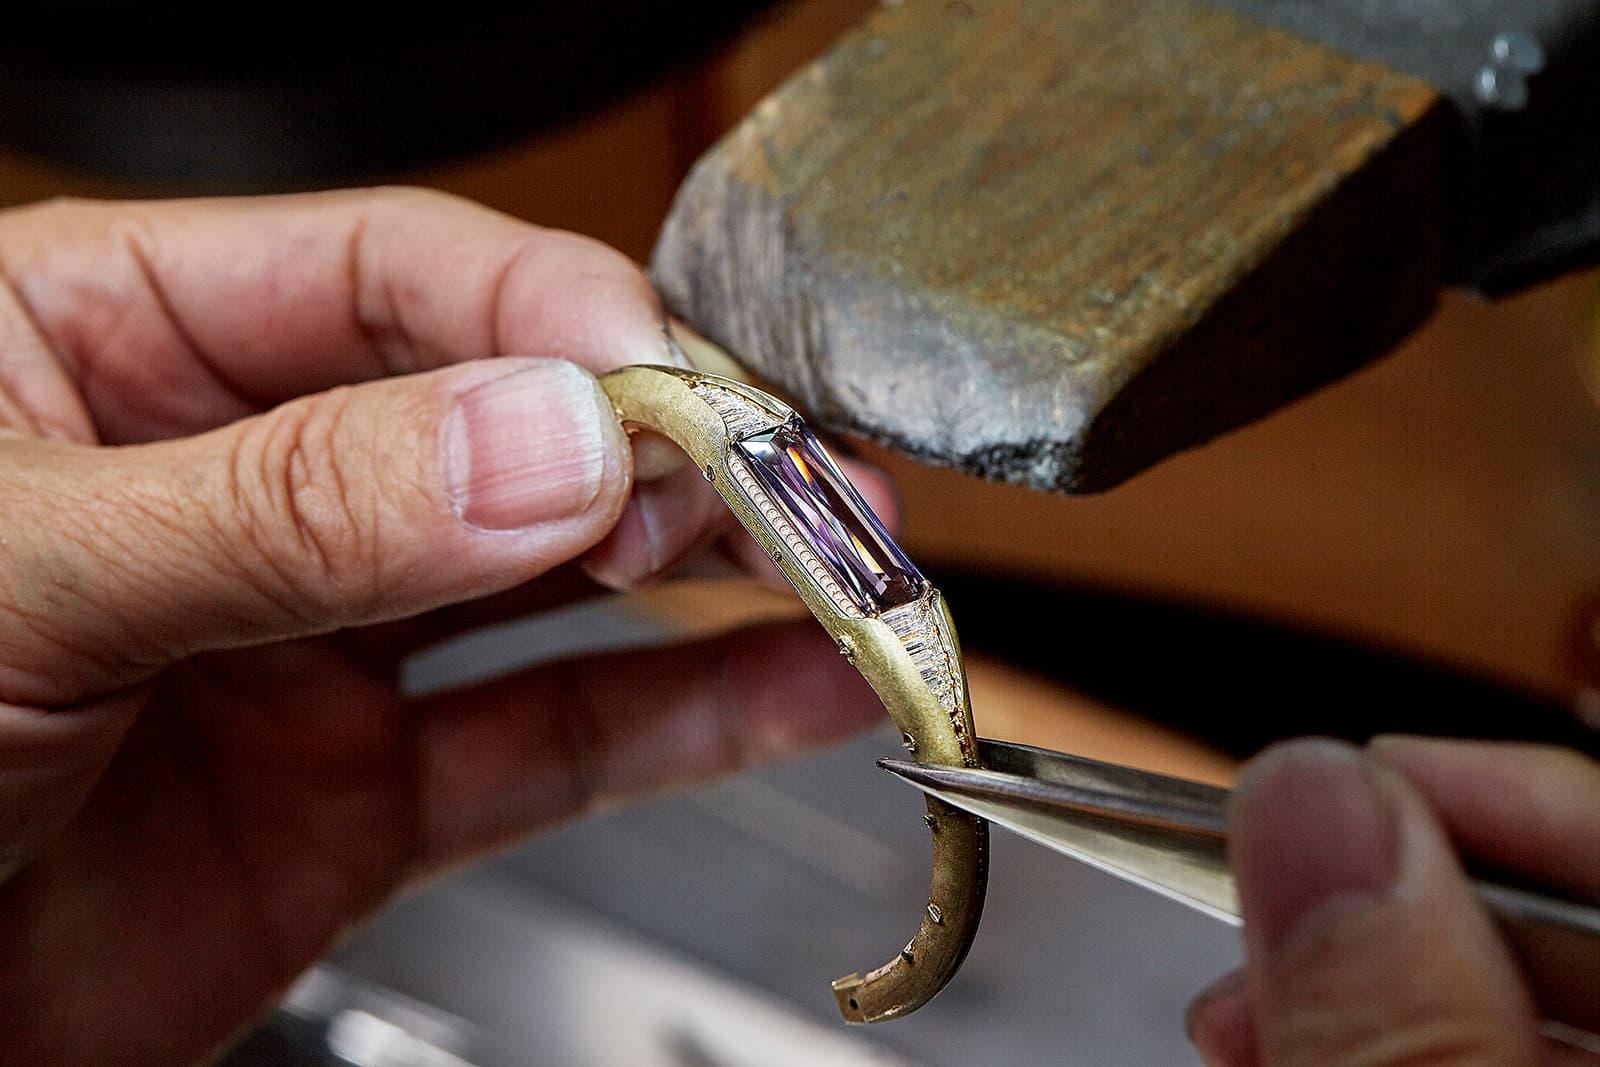 Creating the FORMS MUSE 18k rose gold and bronze bangle with an 8.08 carat purplish-pink spinel and diamonds